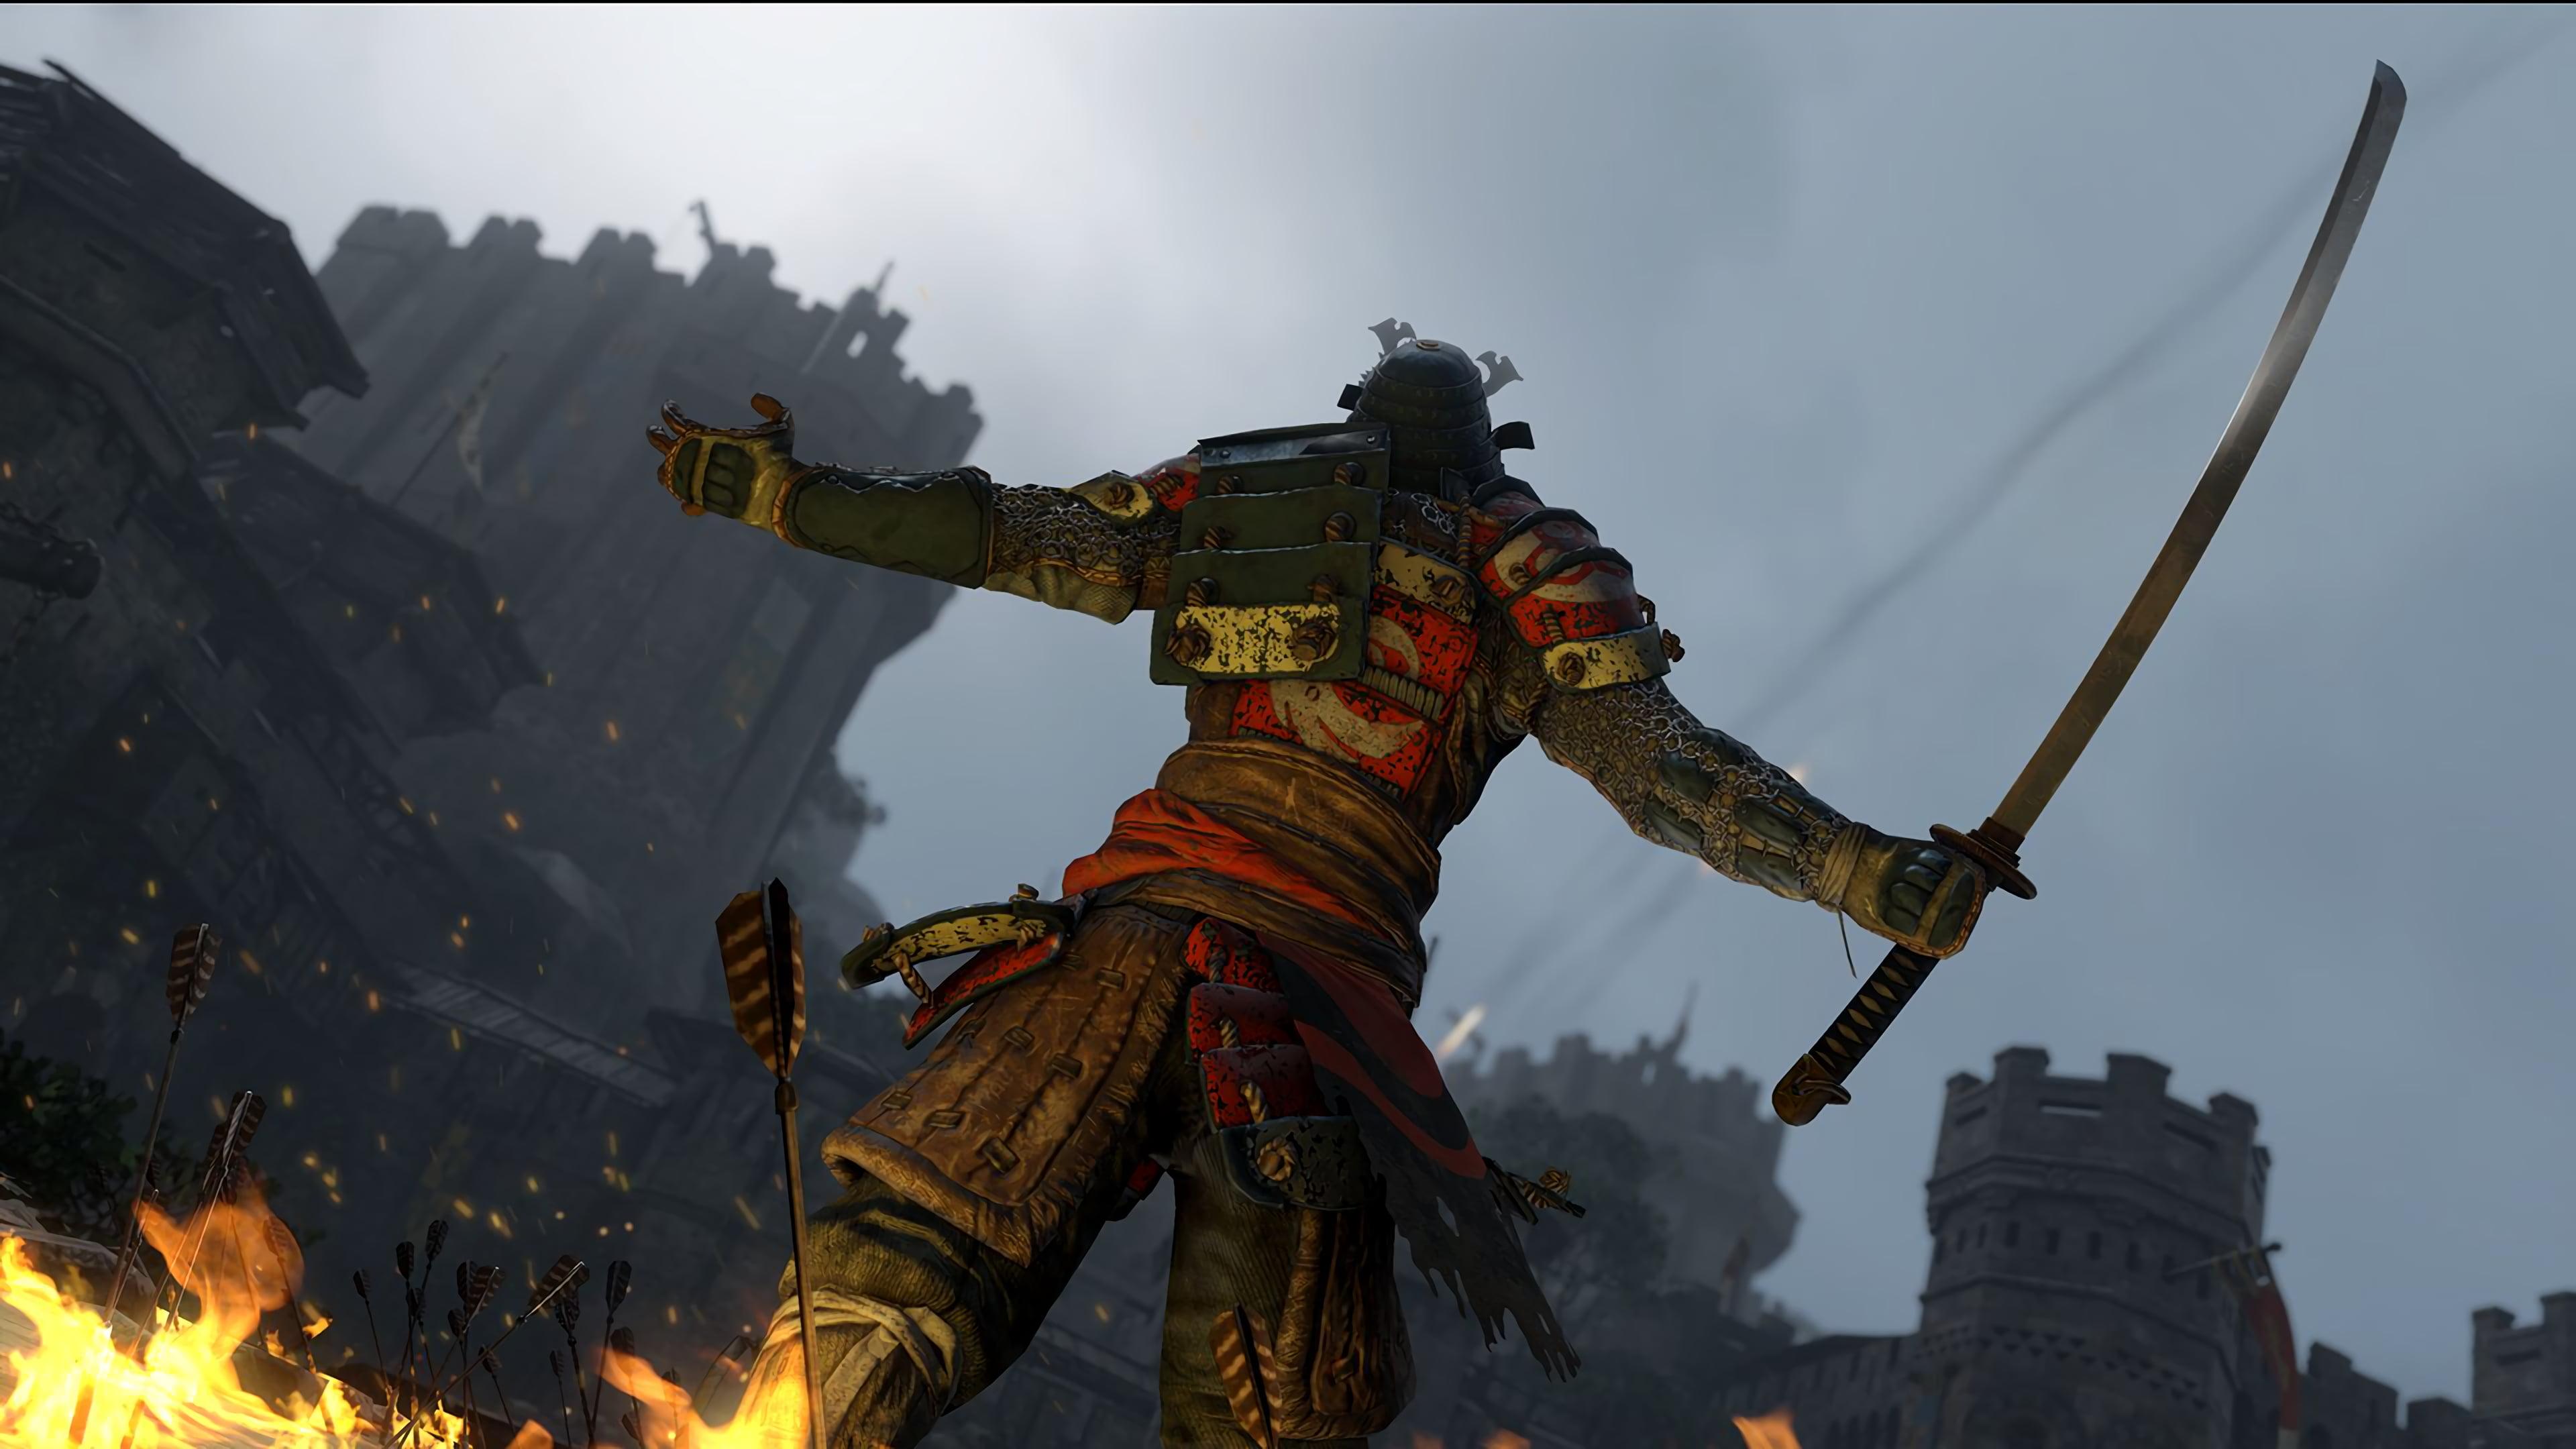 orochi for honor